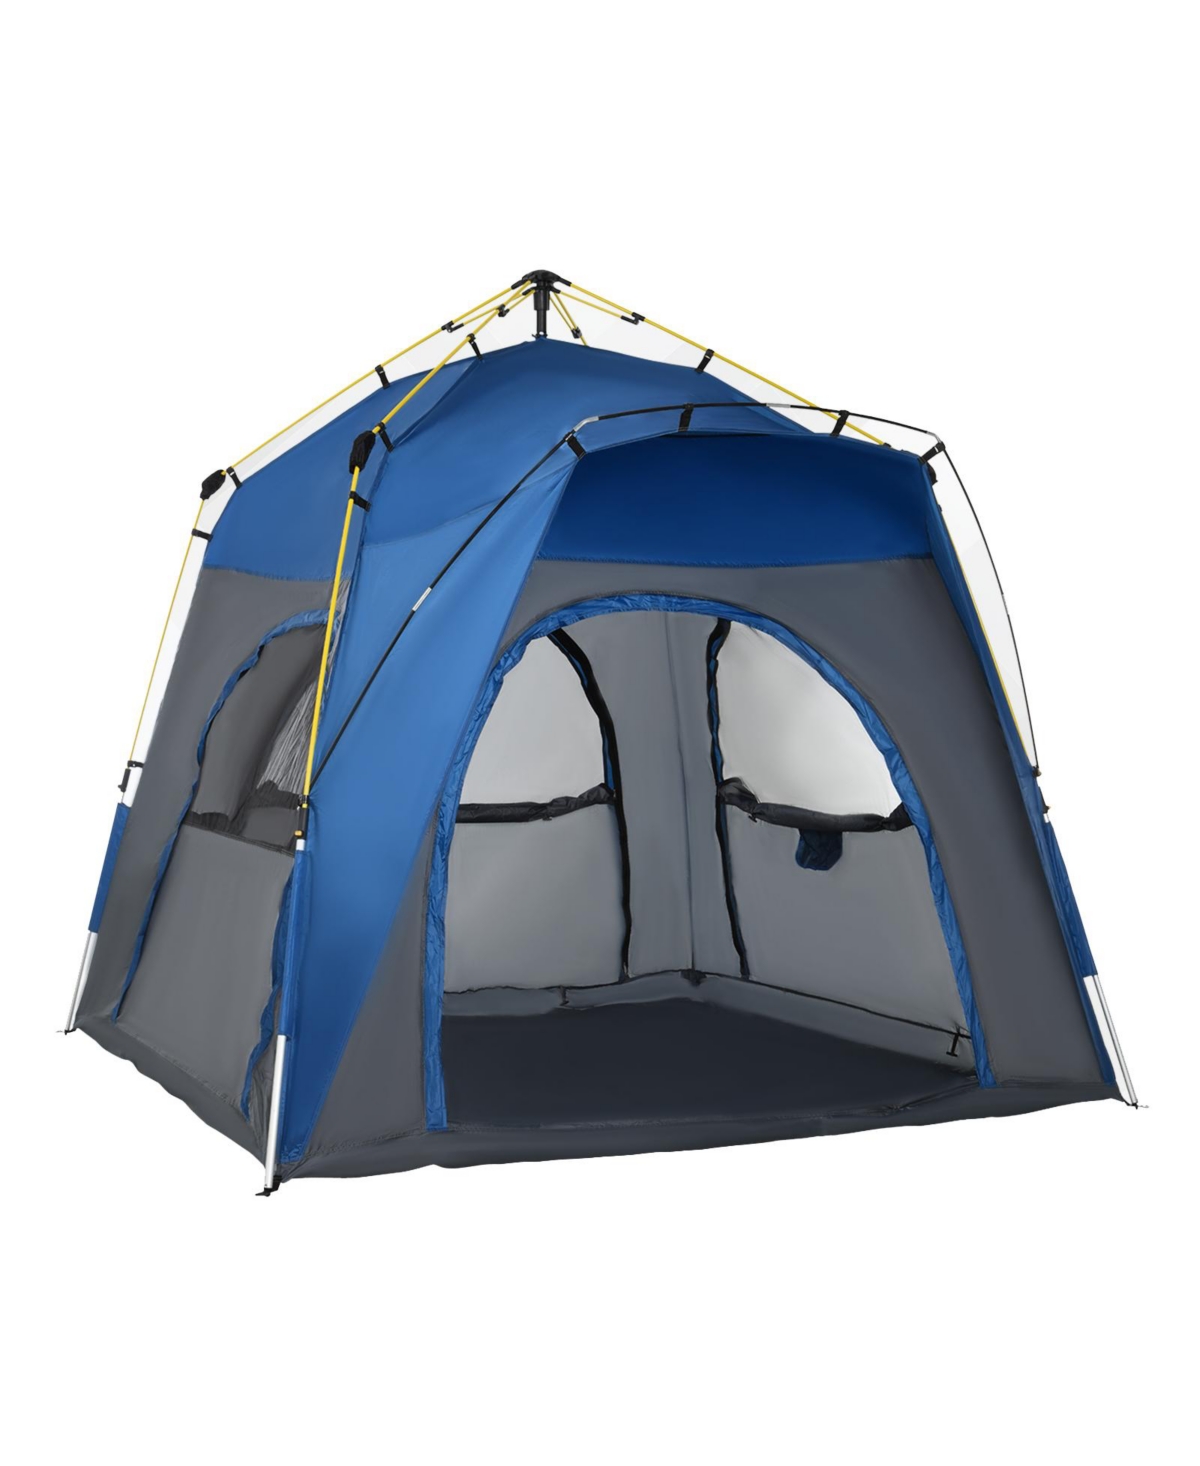 Camping Tents 4 Person Pop Up Tent Quick Setup Automatic Hydraulic Family Travel Tent w/ Windows, Doors Carry Bag Included - Blue